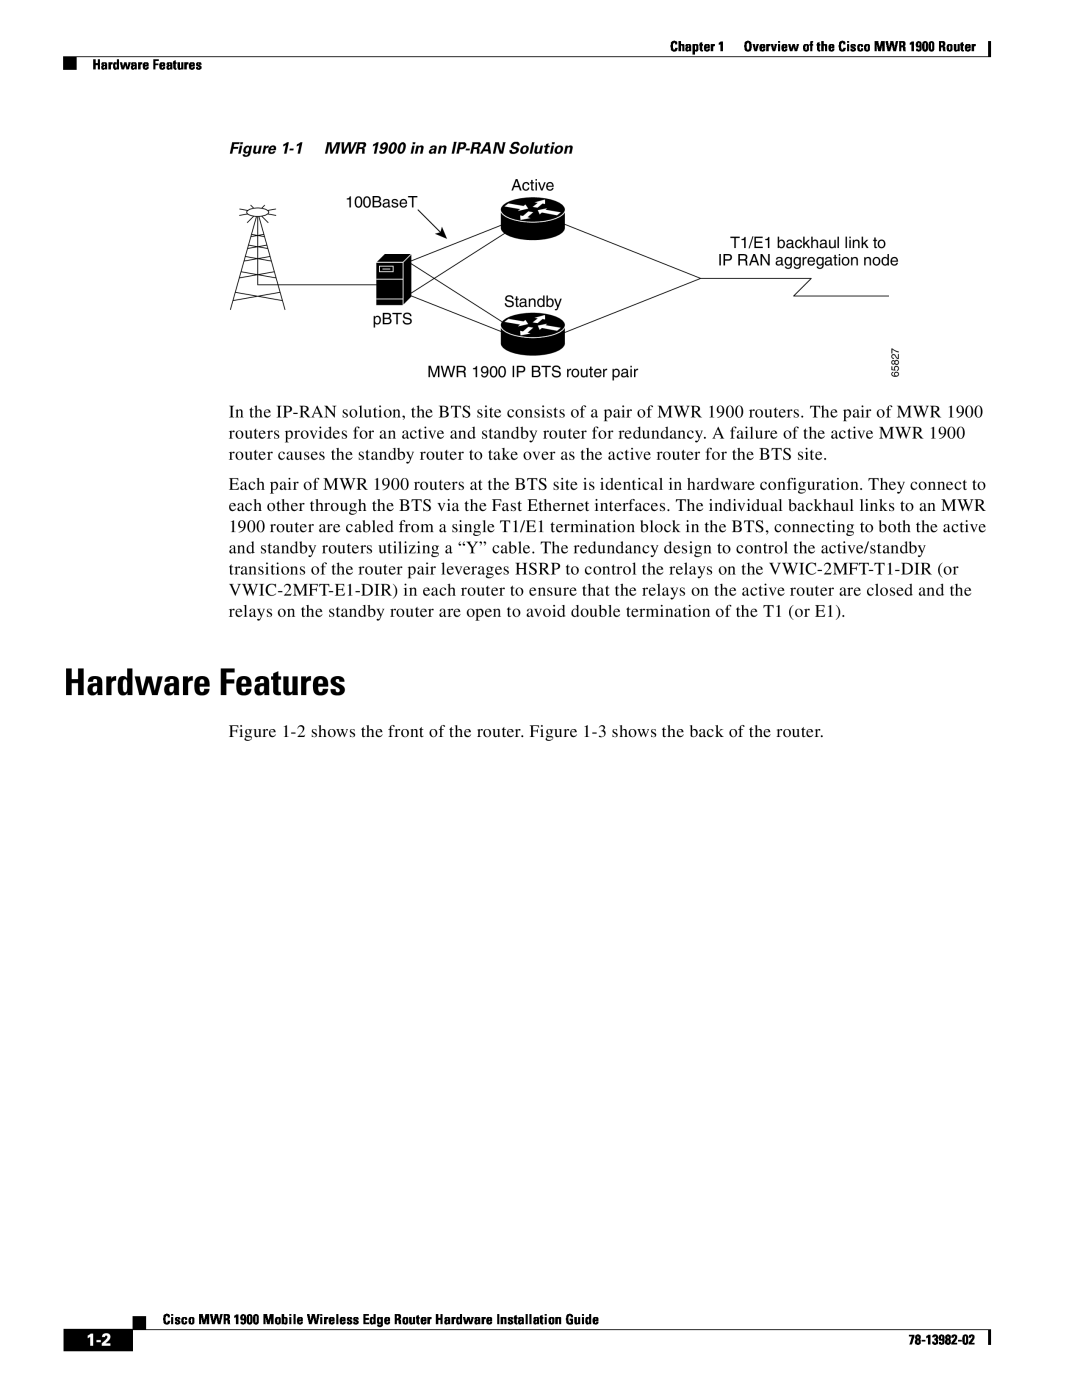 Cisco Systems manual Hardware Features, 1 MWR 1900 in an IP-RAN Solution 